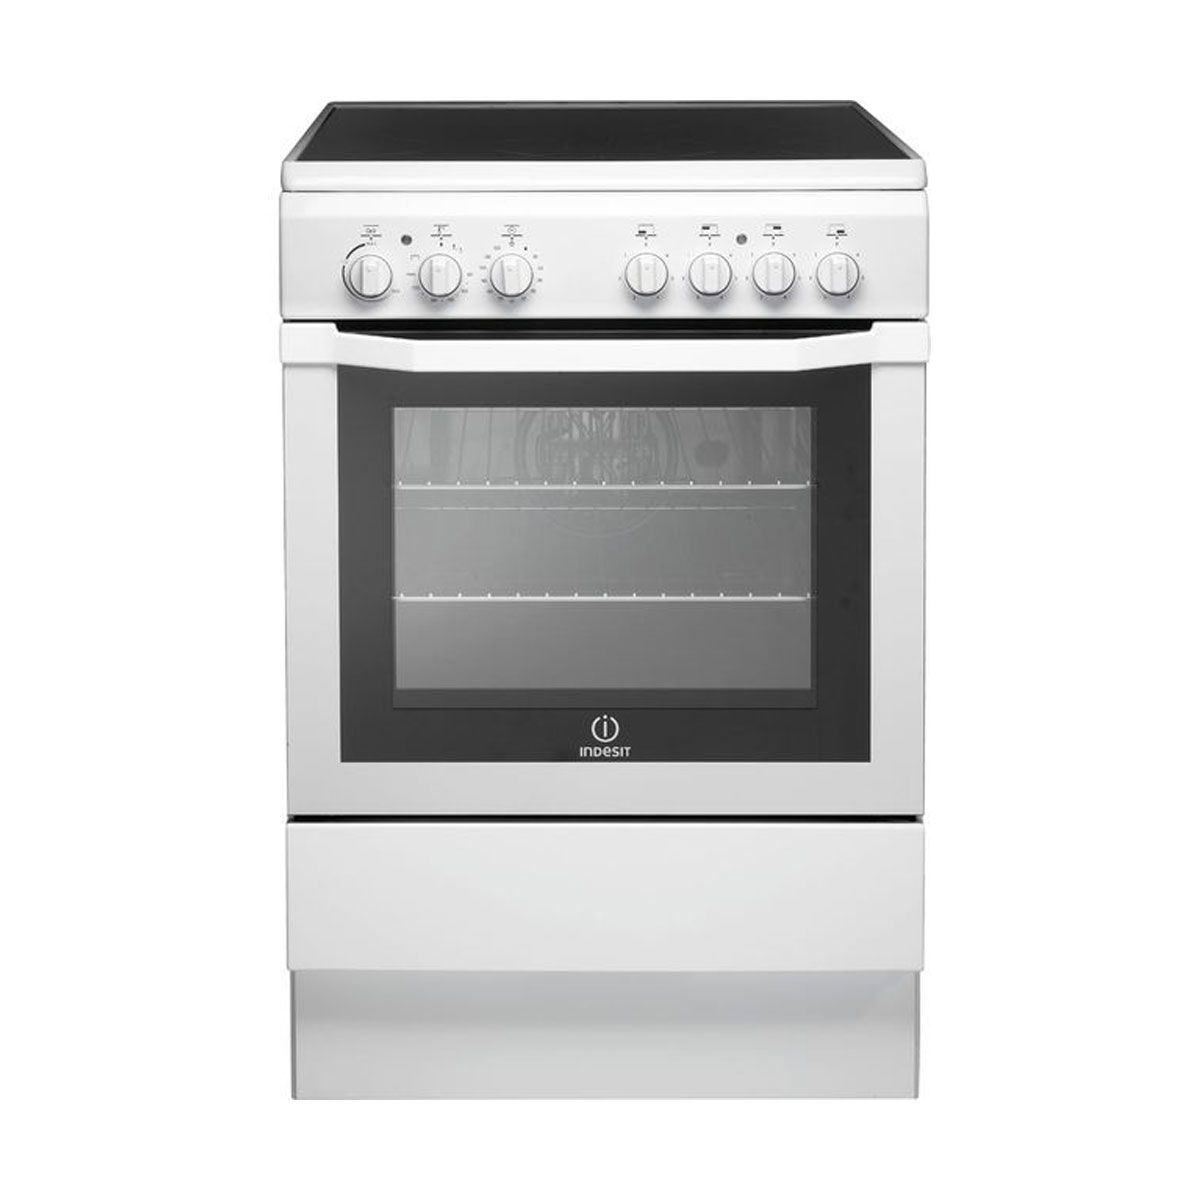 Indesit I6VV2AW 60cm Electric Single Cooker with Ceramic Hob White A  NE Appliances